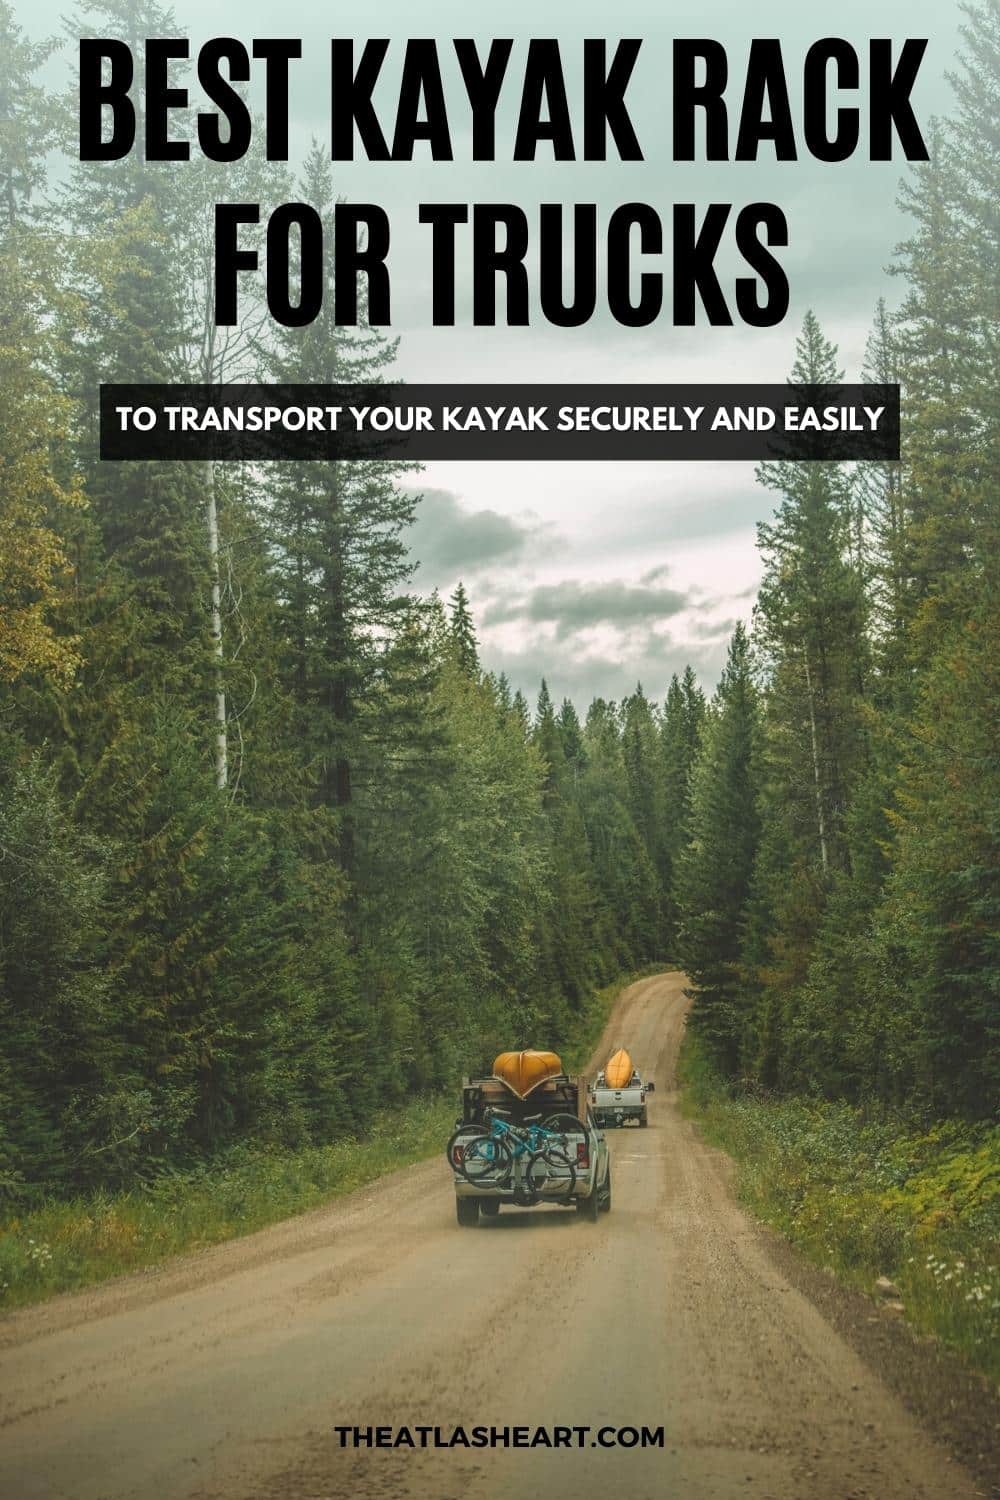 11 Best Kayak Racks for Trucks to Transport Your Kayak Securely and Easily